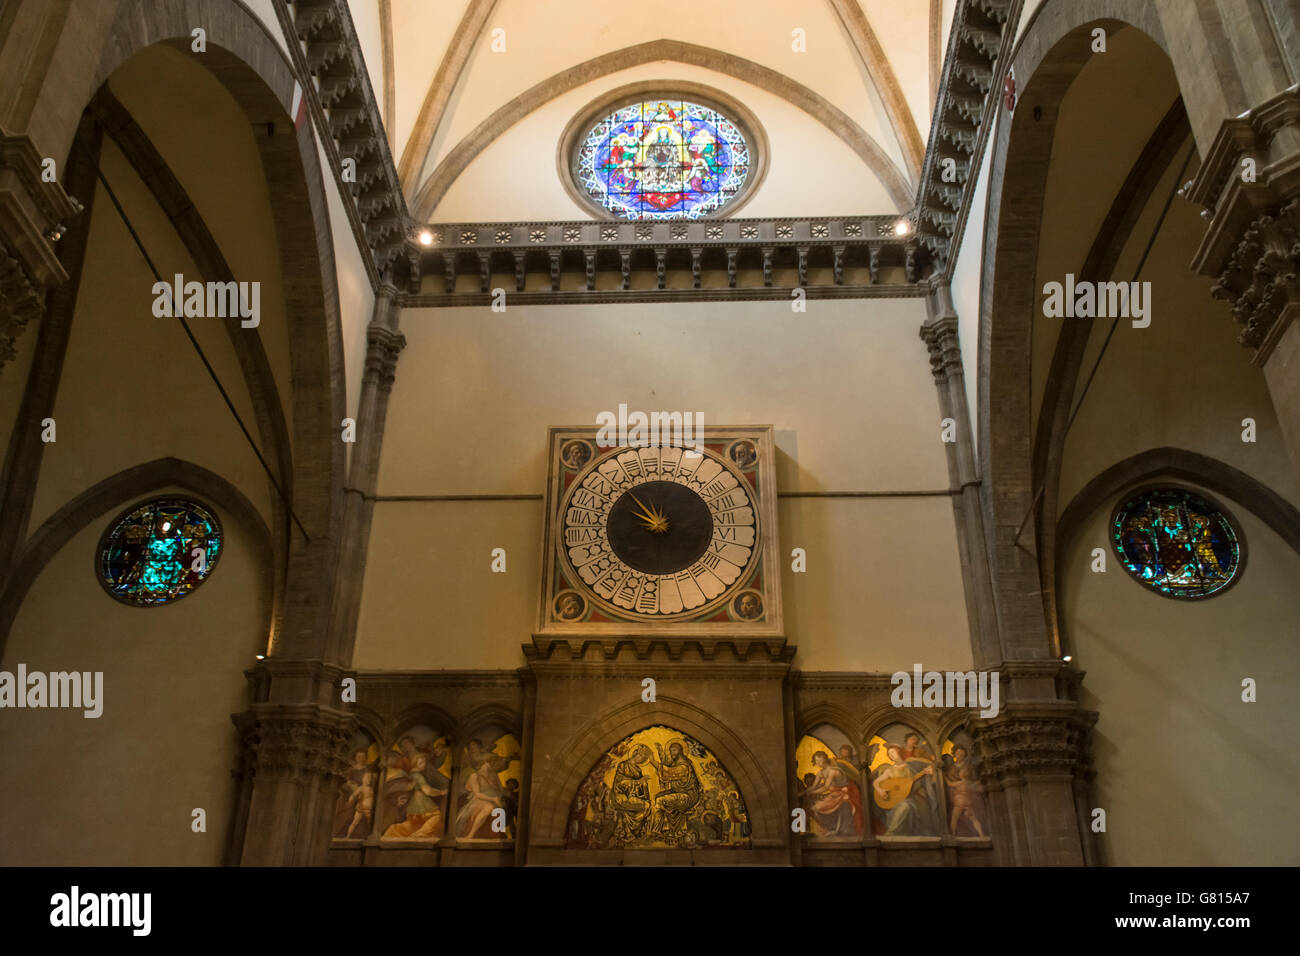 Interior view of the cathedral Santa Maria del Fiore in Florence, Italy Stock Photo